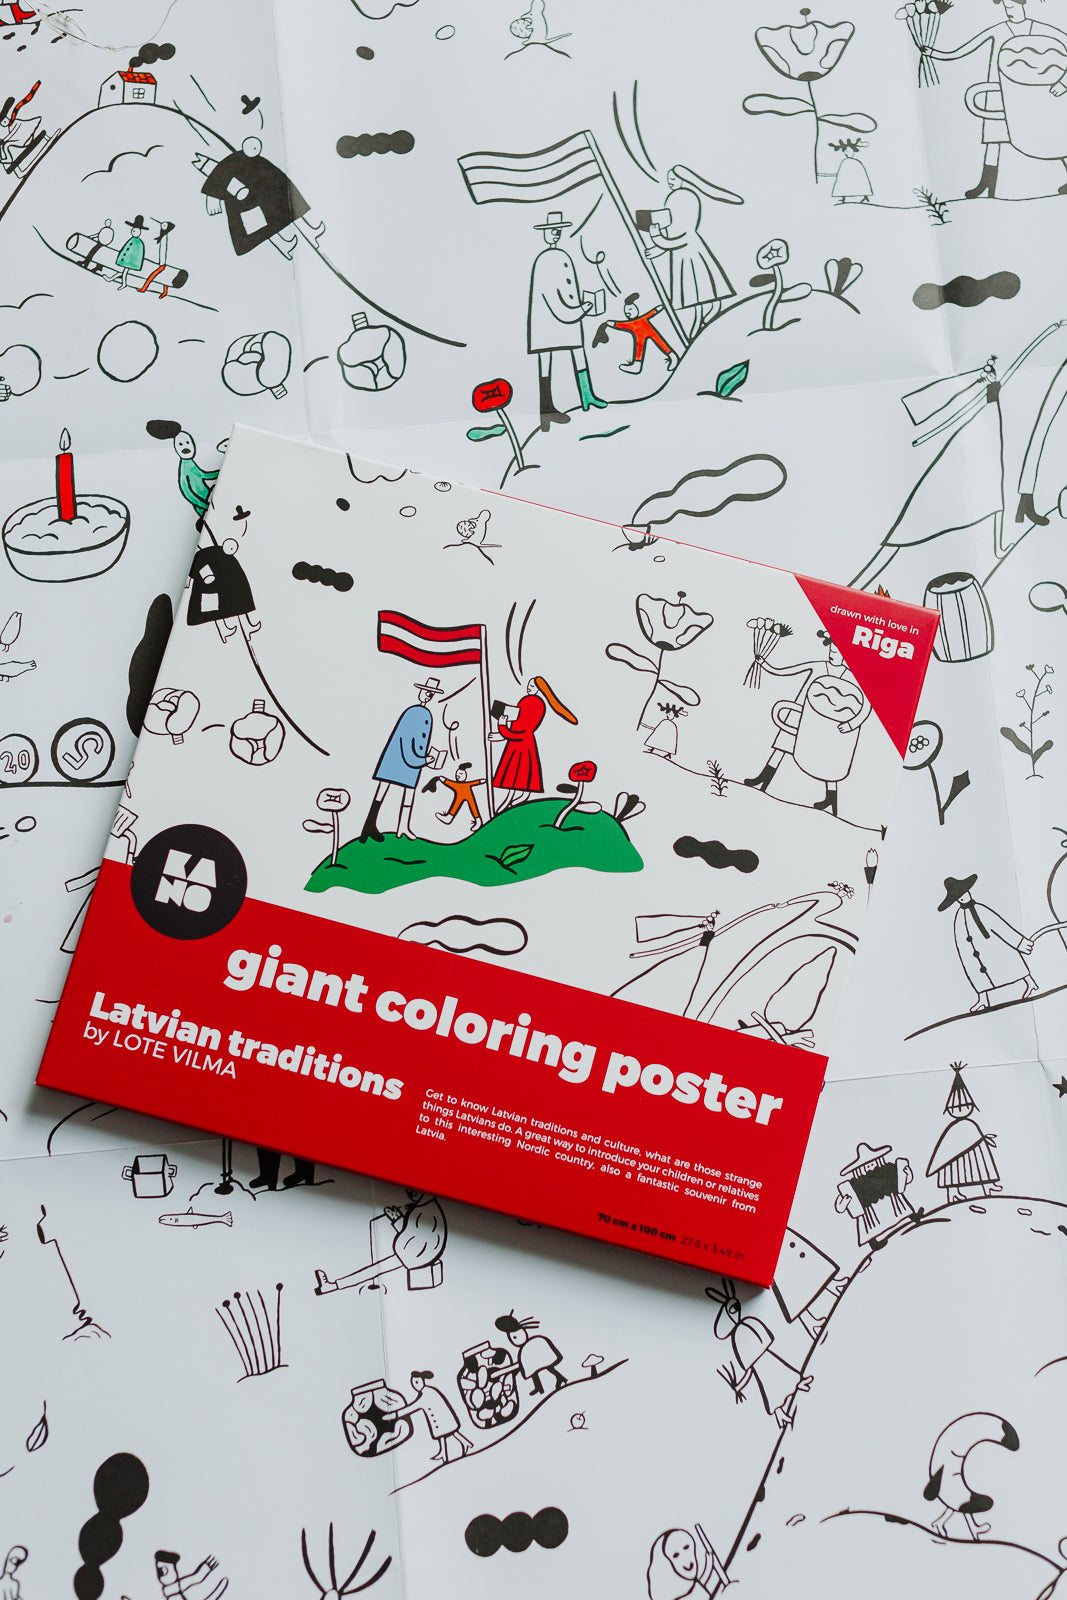 XXL giant coloring poster Latvian traditions, isbn 978-9934-8993-1-7, poster box on top of coloring poster